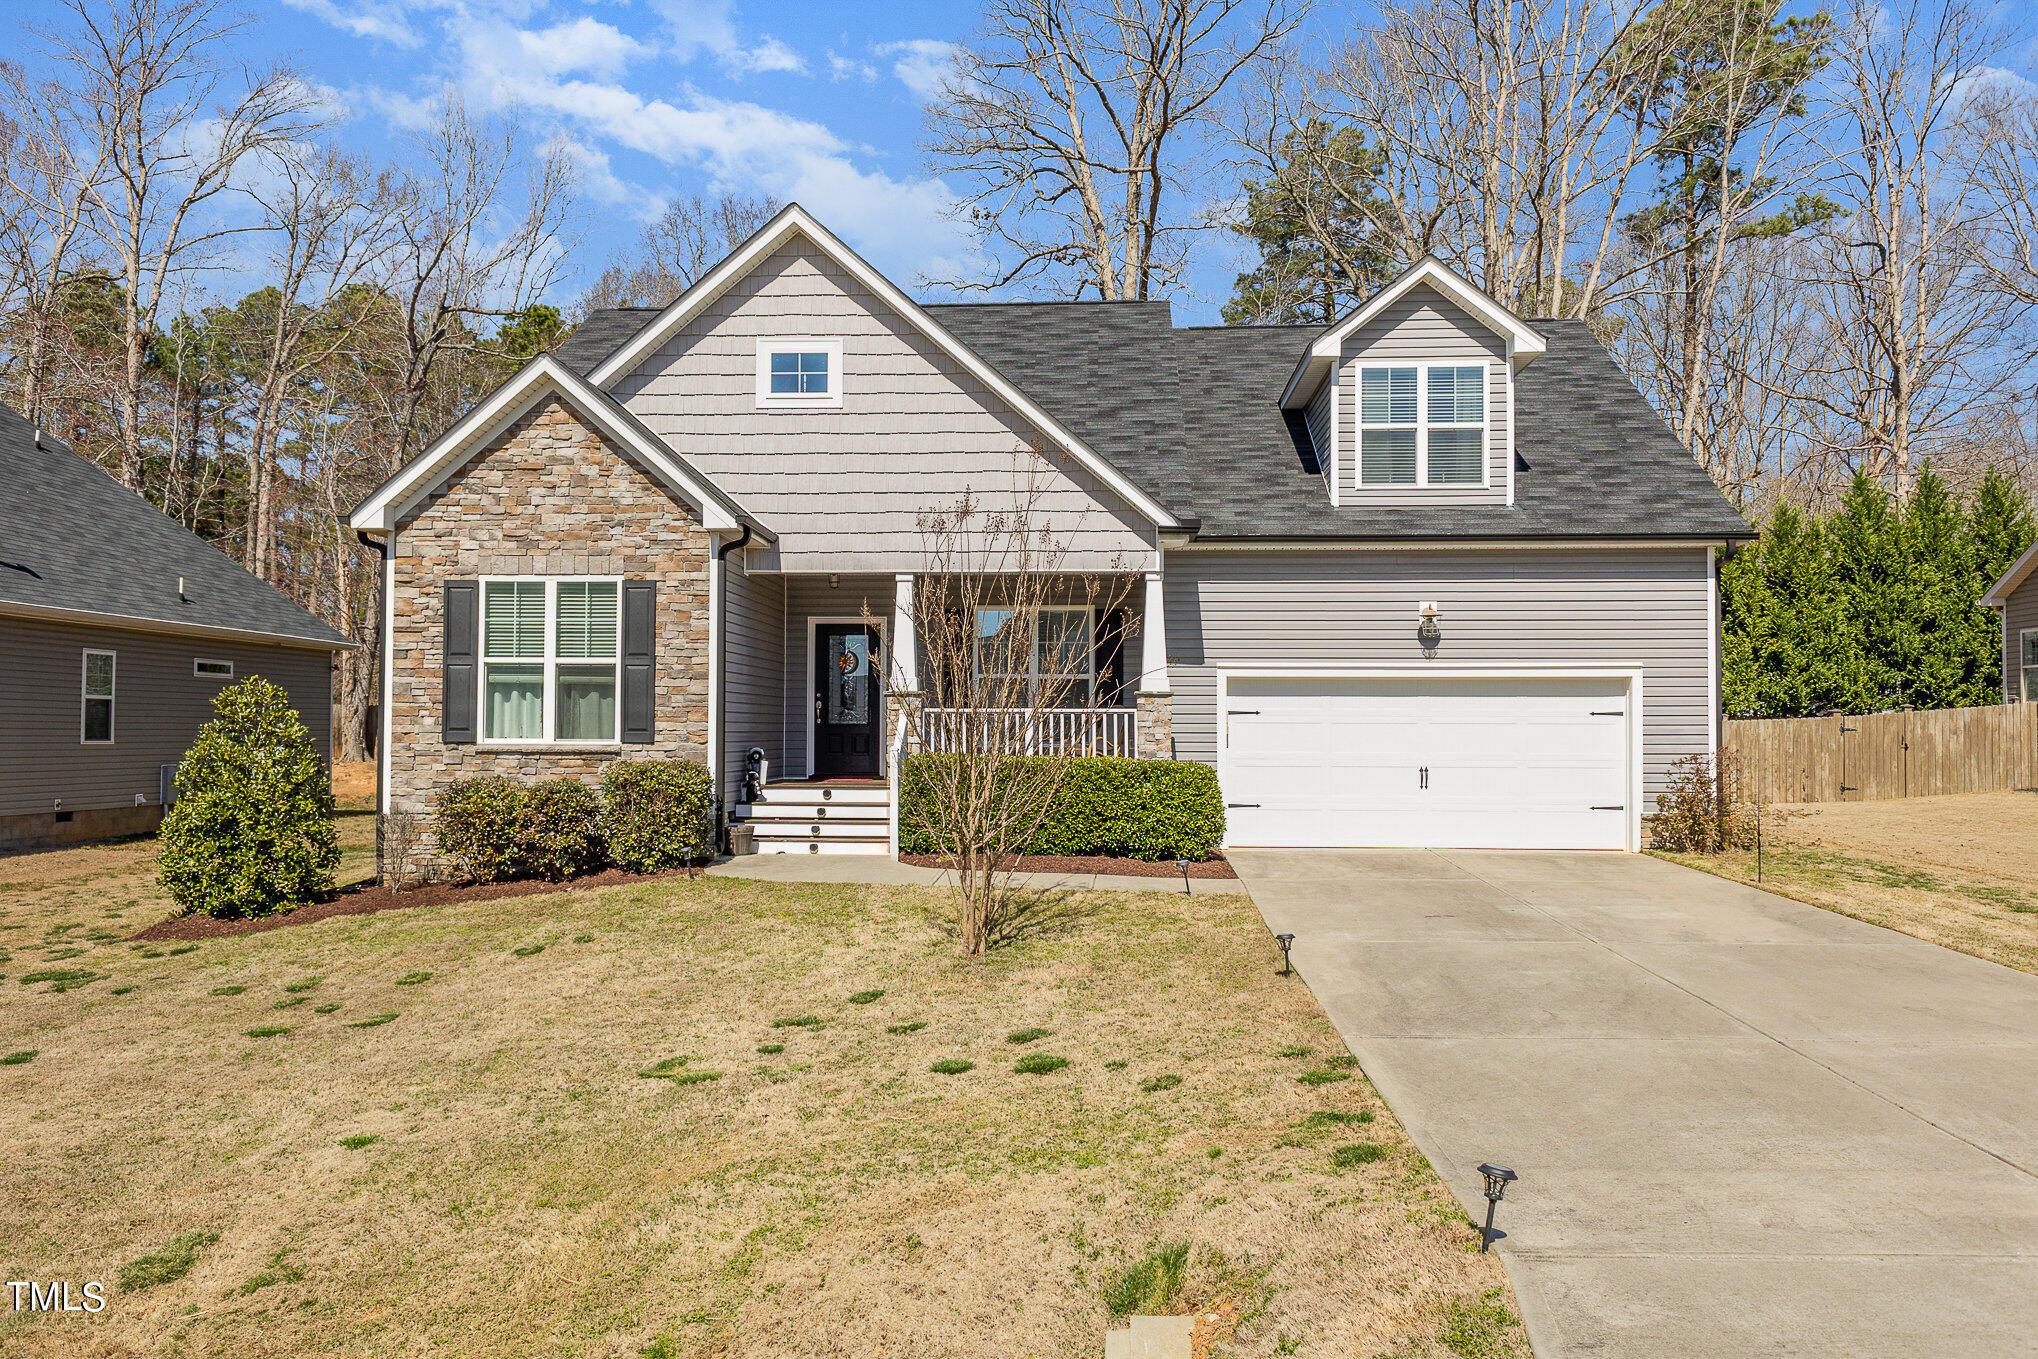 Photo one of 290 Paddy Ln Youngsville NC 27596 | MLS 10017057